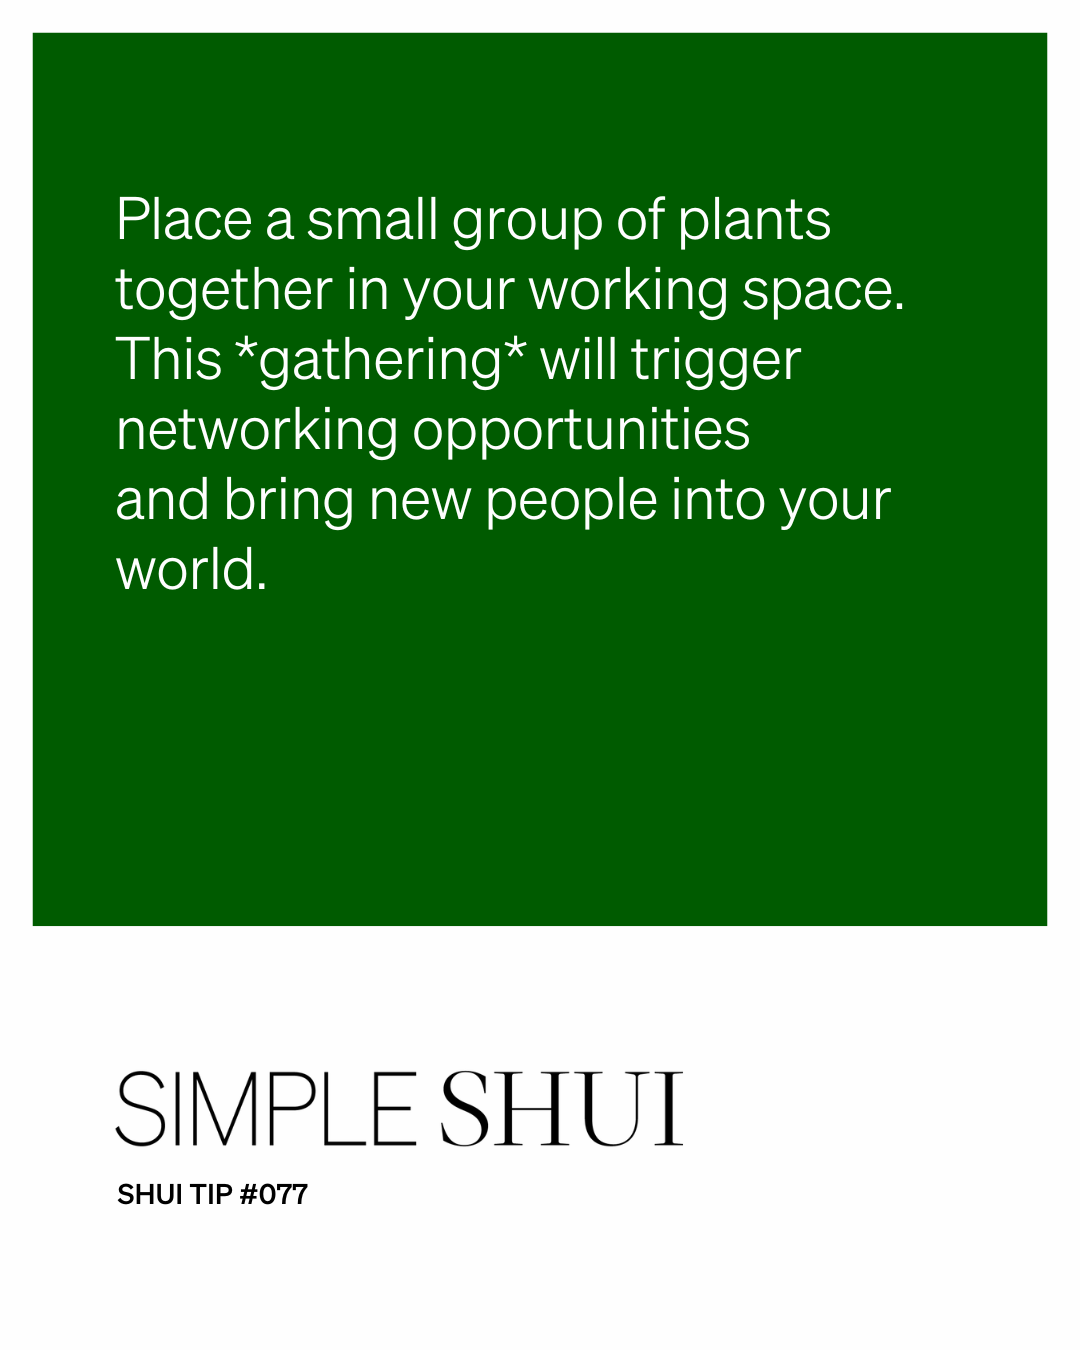 simple shui tip: plant some prosperity